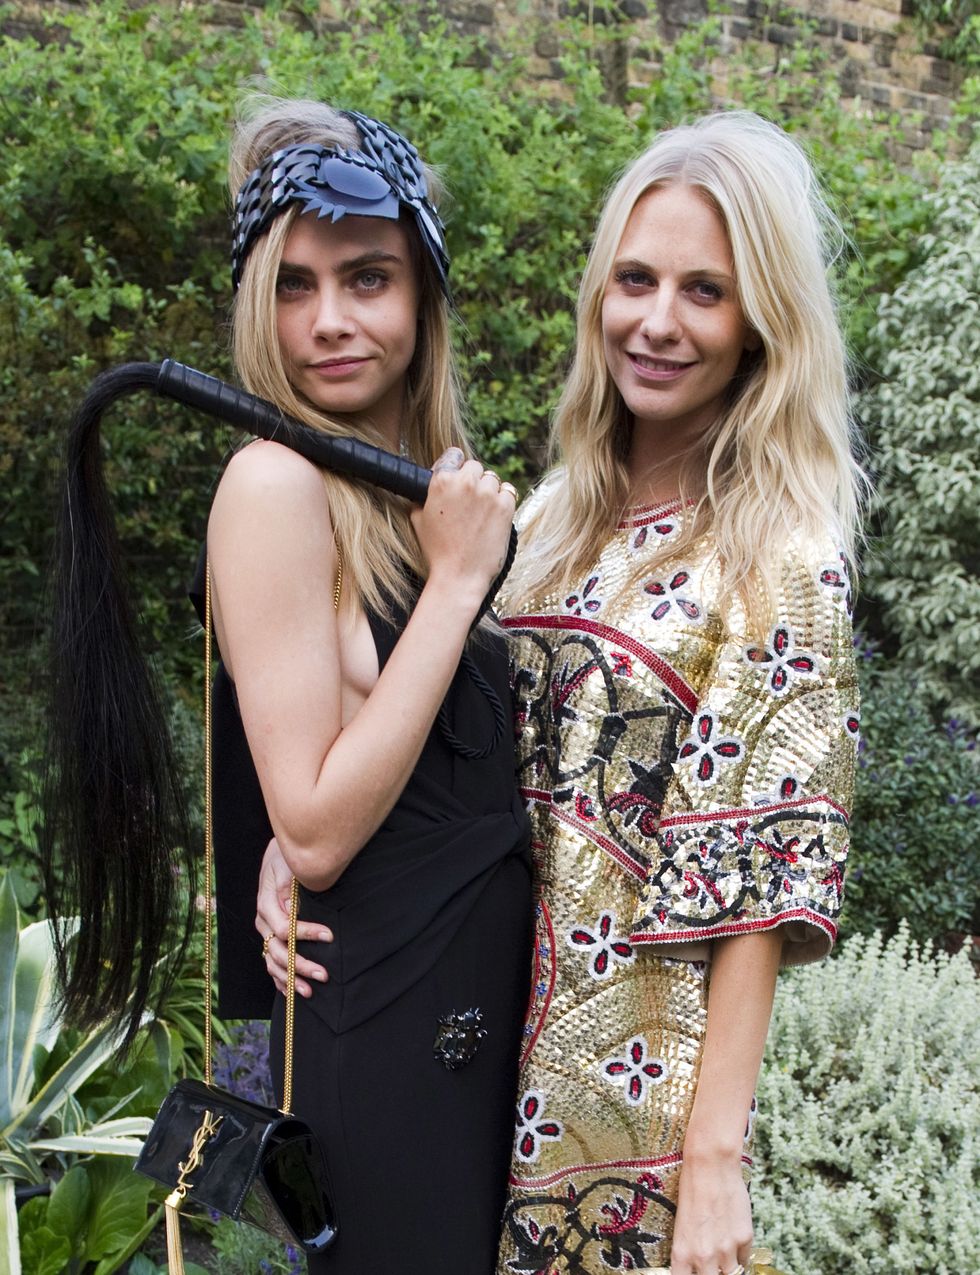 LONDON, UNITED KINGDOM - JULY 09: Cara Delevingne and Poppy Delevingne attend The Elephant Family presents "The Animal Ball" at Lancaster House on July 9, 2013 in London, England. (Photo by David M. Benett/Getty Images)